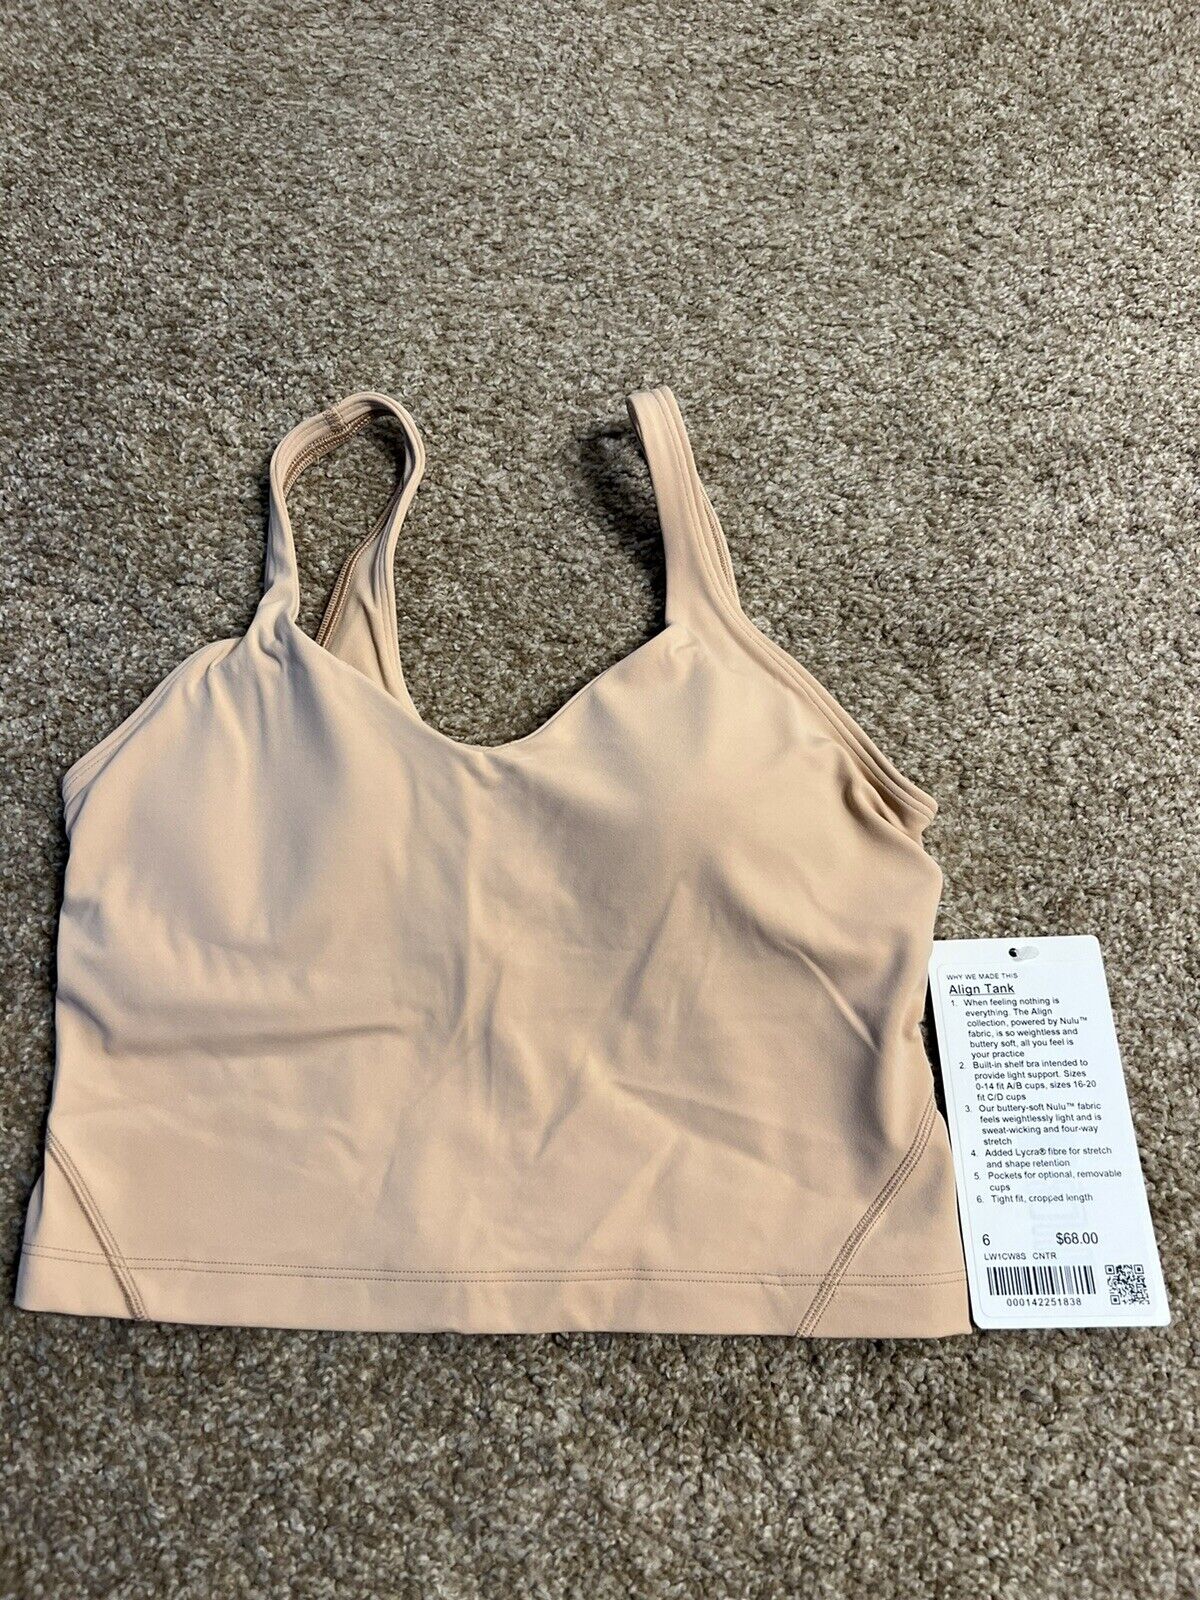 LULULEMON ALIGN CROPPED TANK TOP Contour Size 6 NWT